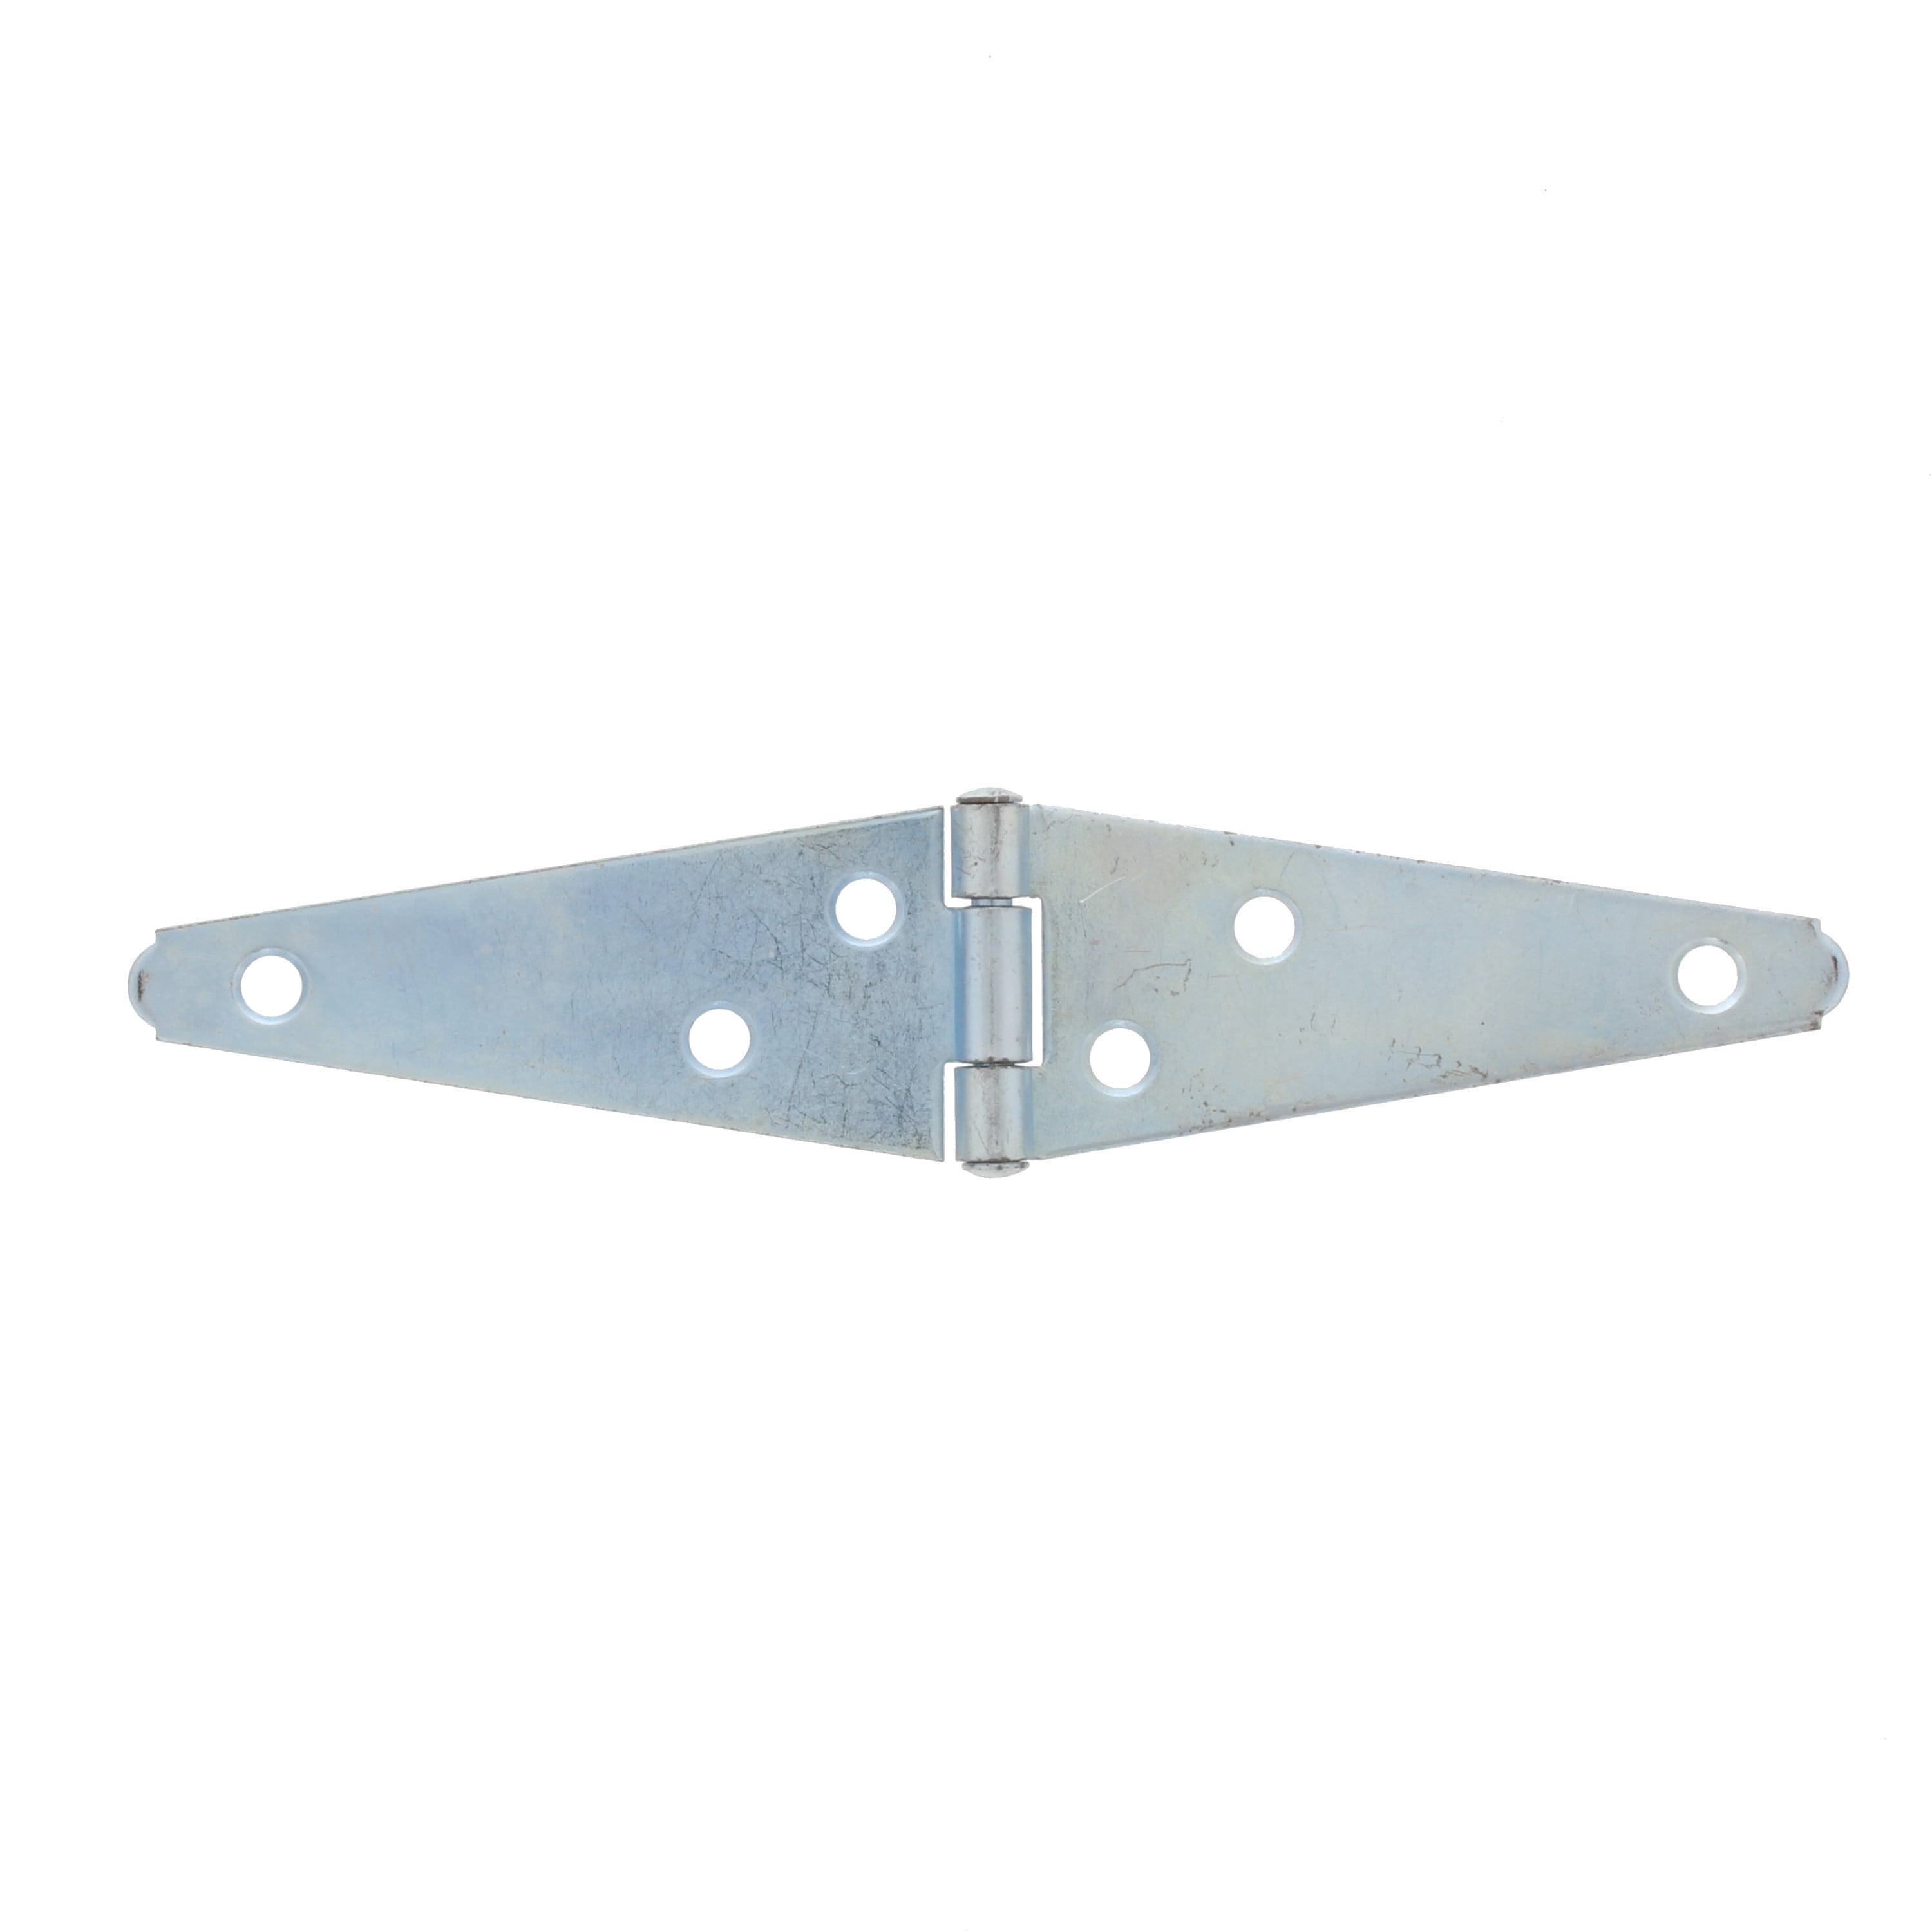 Stainless Steel Cold Room Door Hinges Heavy Duty offset Left/Right 